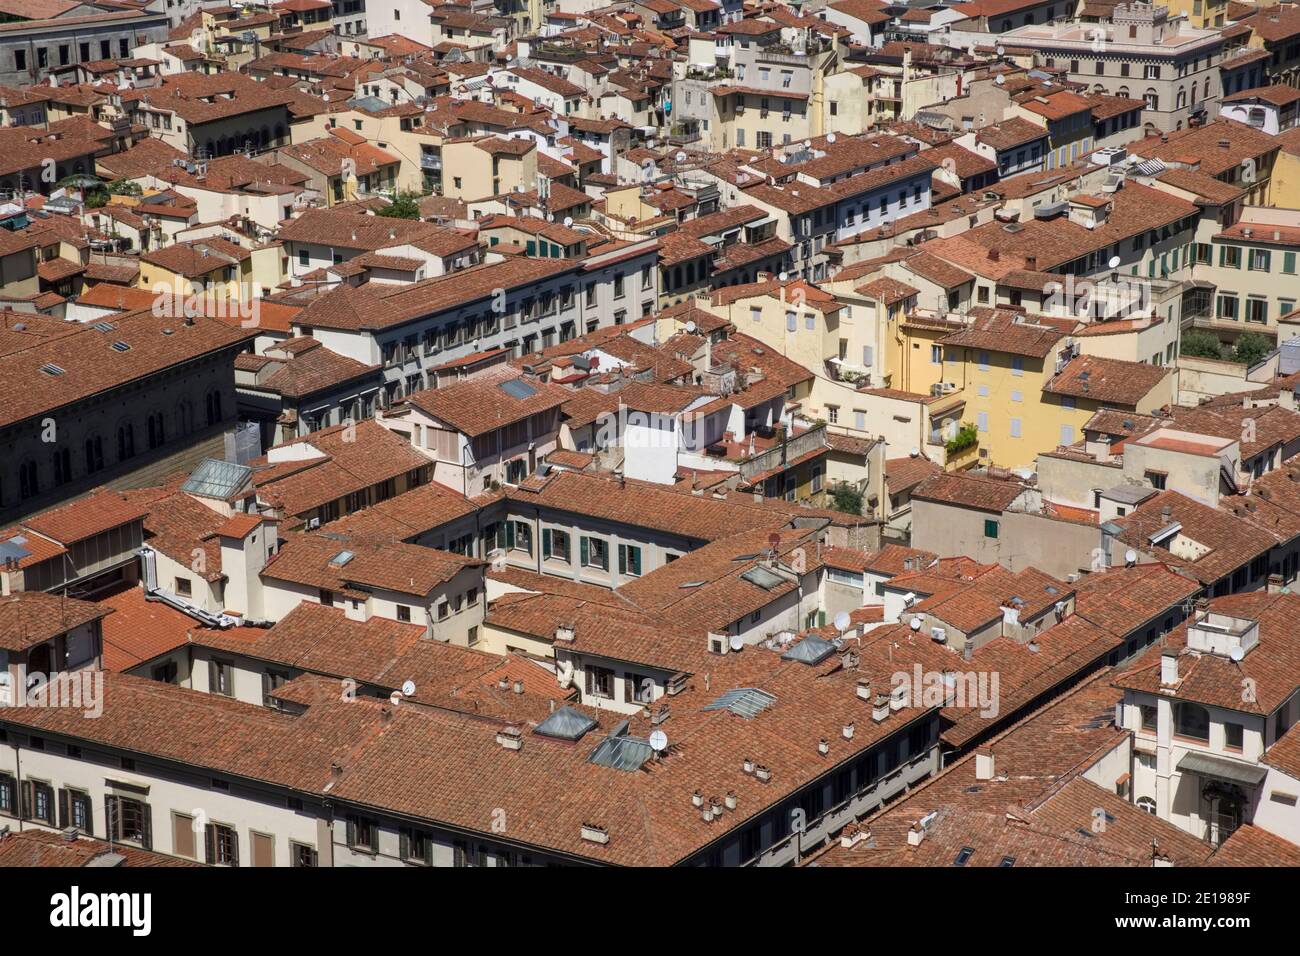 Italy, Tuscany: Florence (Firenze in Italian). Overview of the city from the dome of the Cathedral of Santa Maria del Fiore (The Duomo) Stock Photo